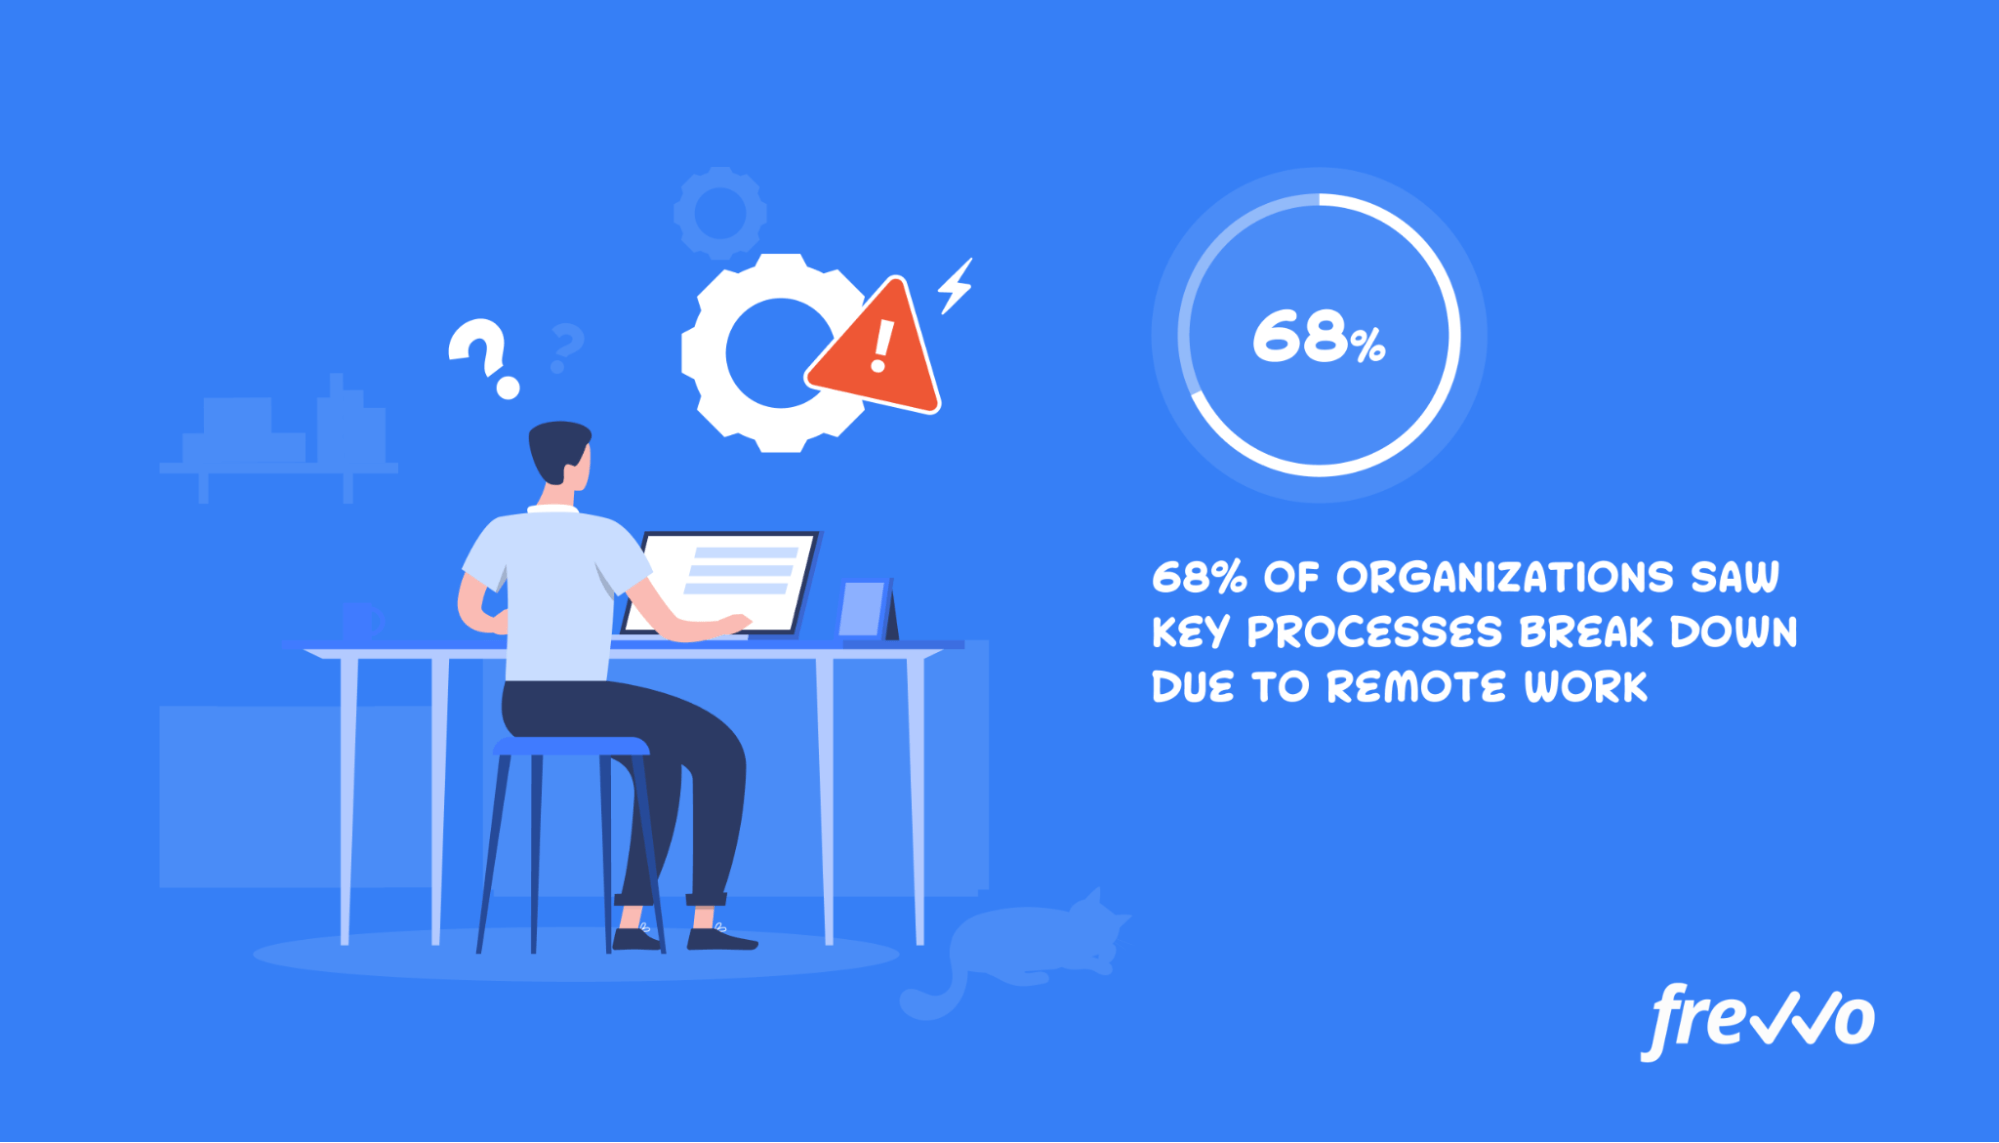 68% of organizations saw key processes break down due to remote work